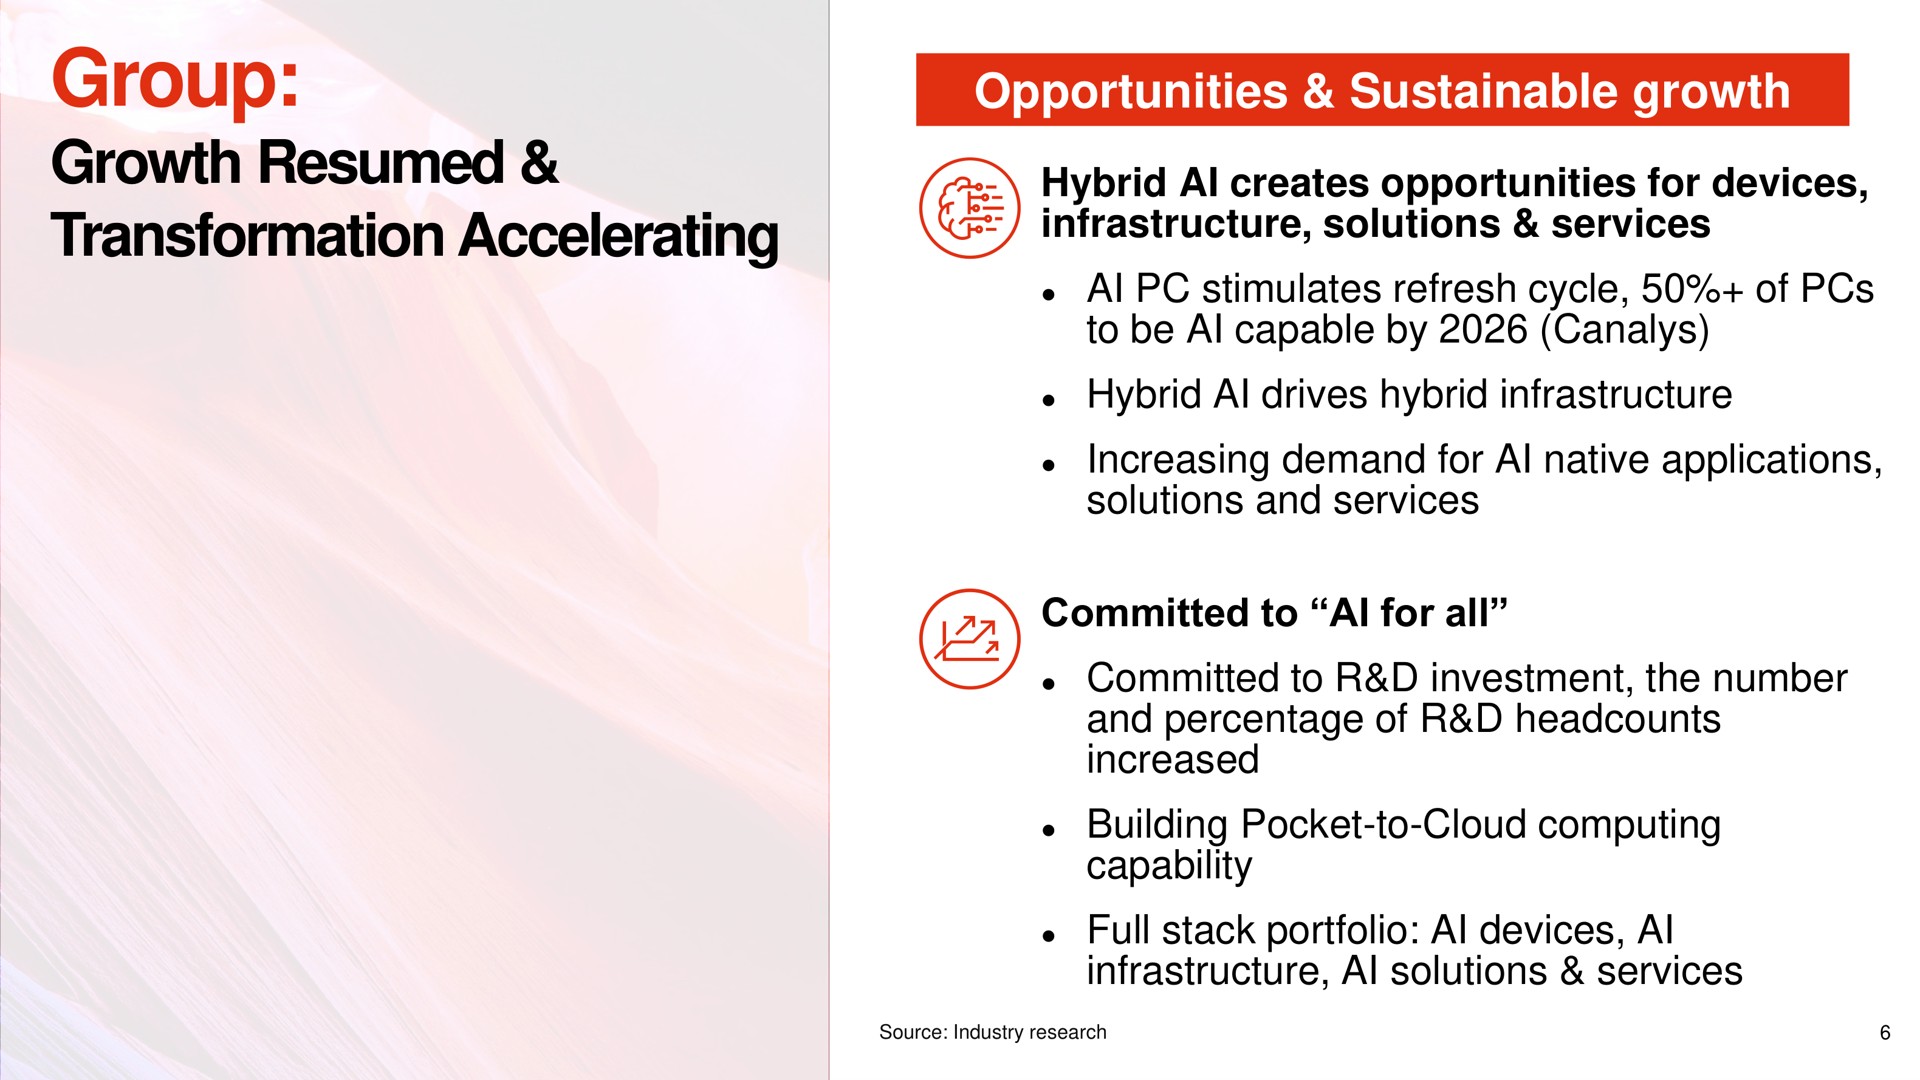 group growth resumed transformation accelerating opportunities sustainable growth hybrid creates for devices committed to for all | Lenovo